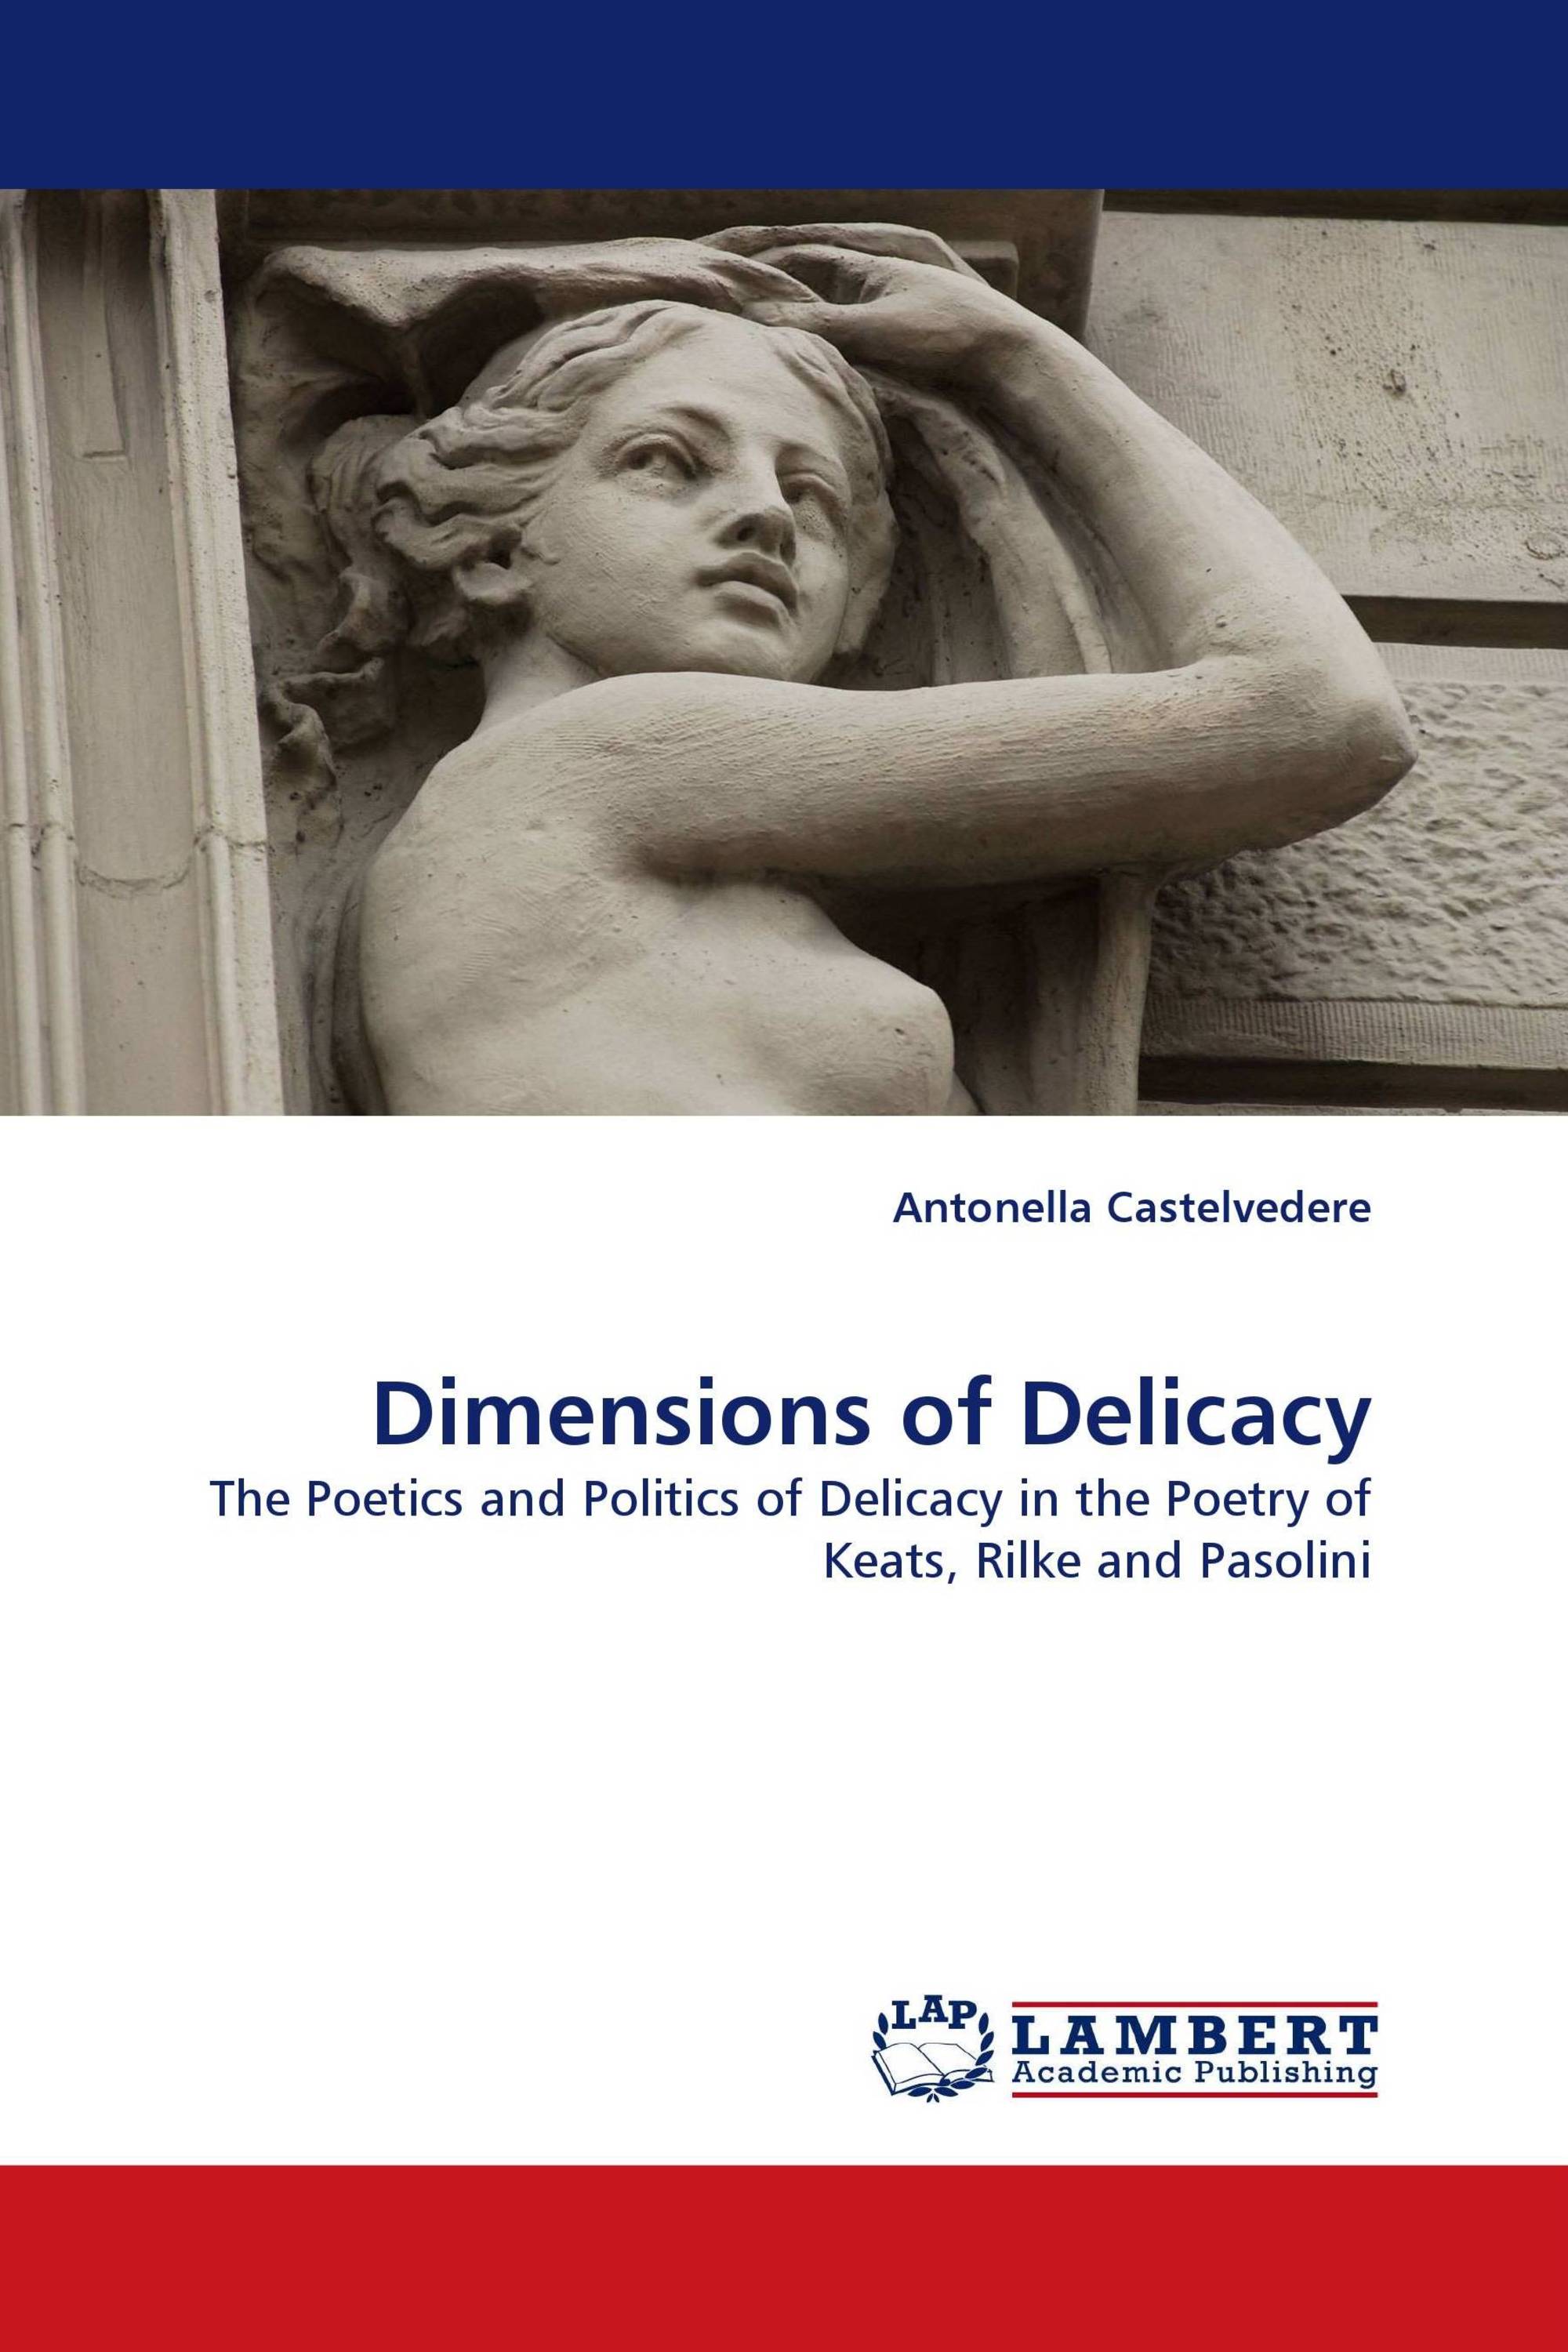 Dimensions of Delicacy